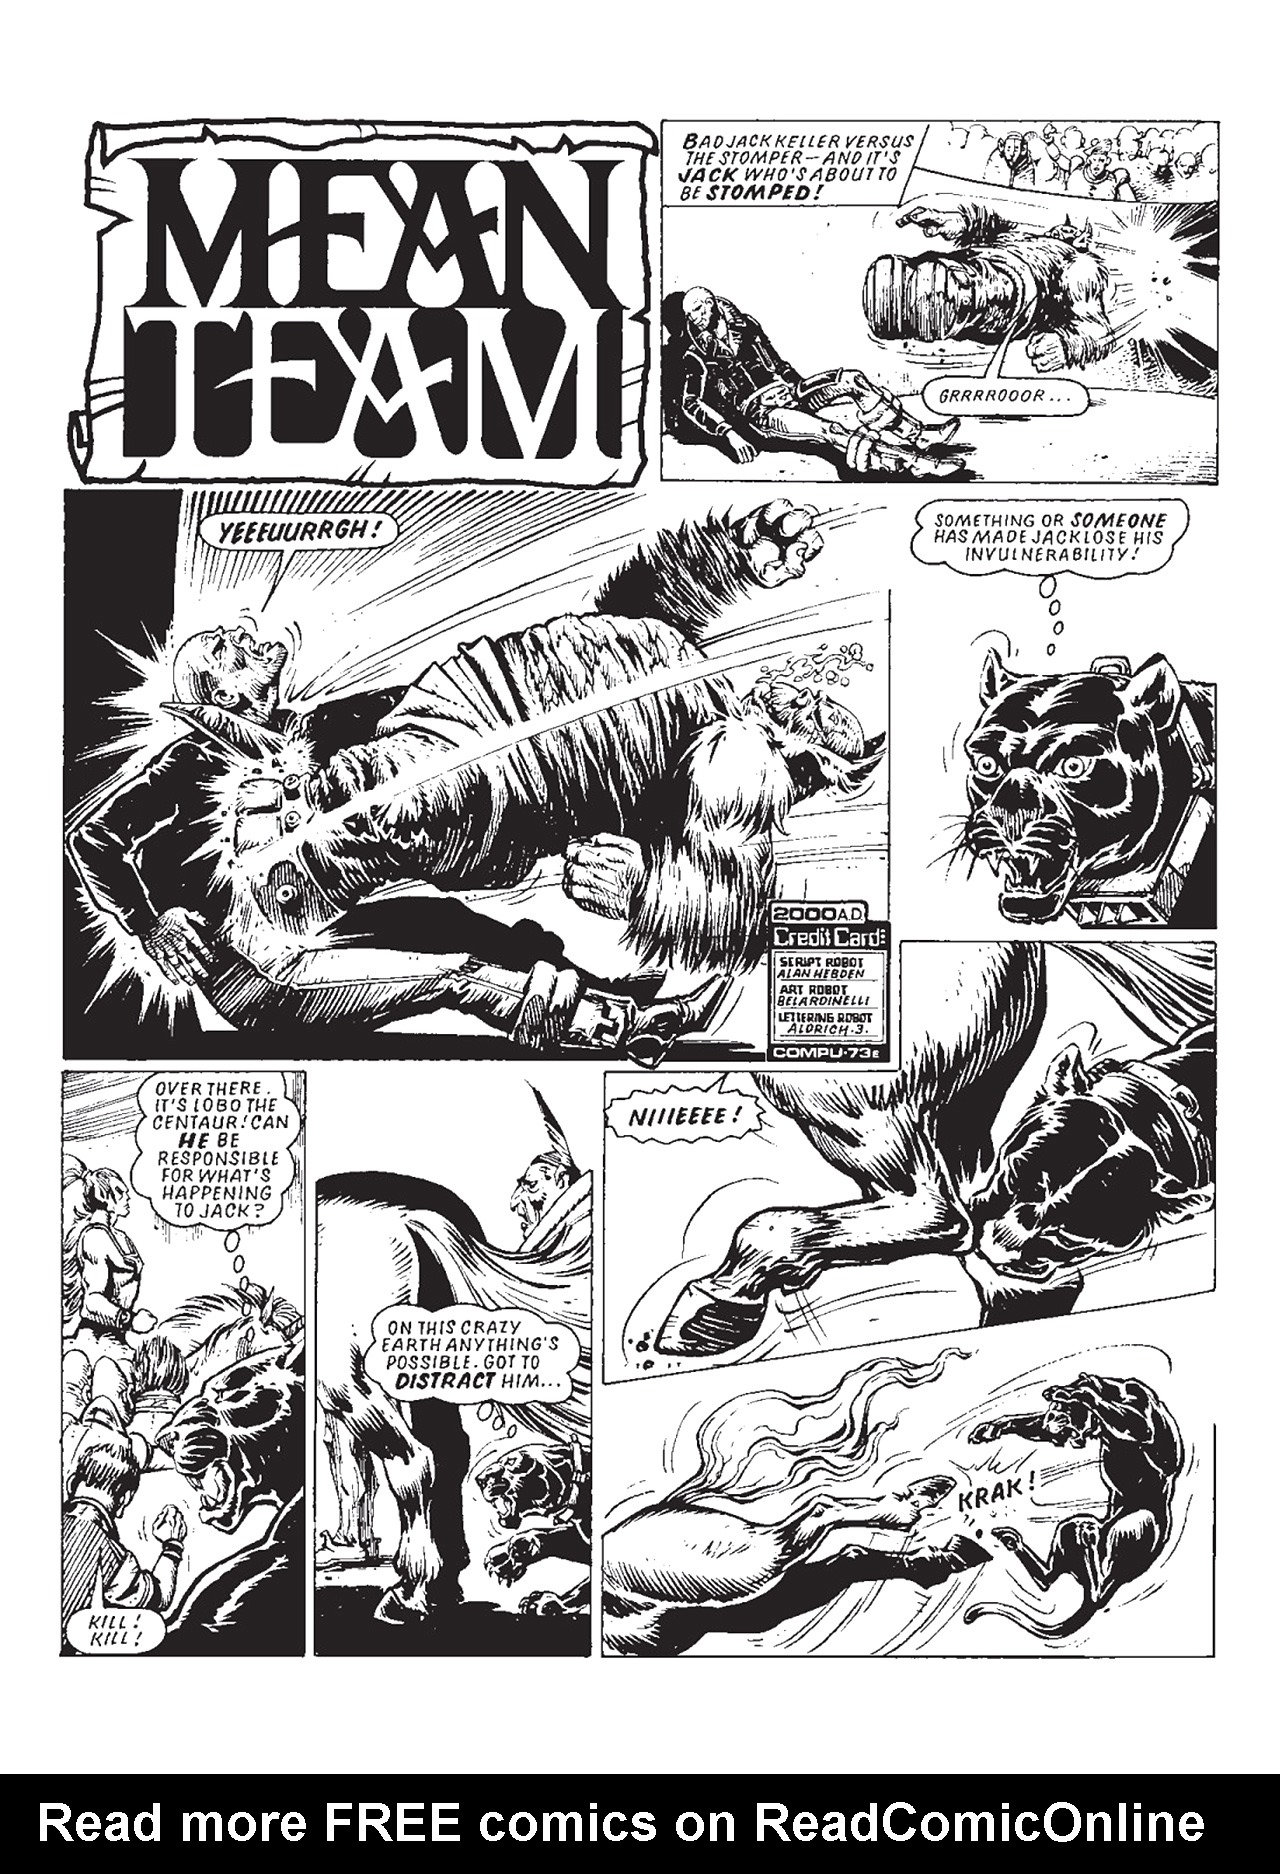 Read online Mean Team comic -  Issue # TPB - 147